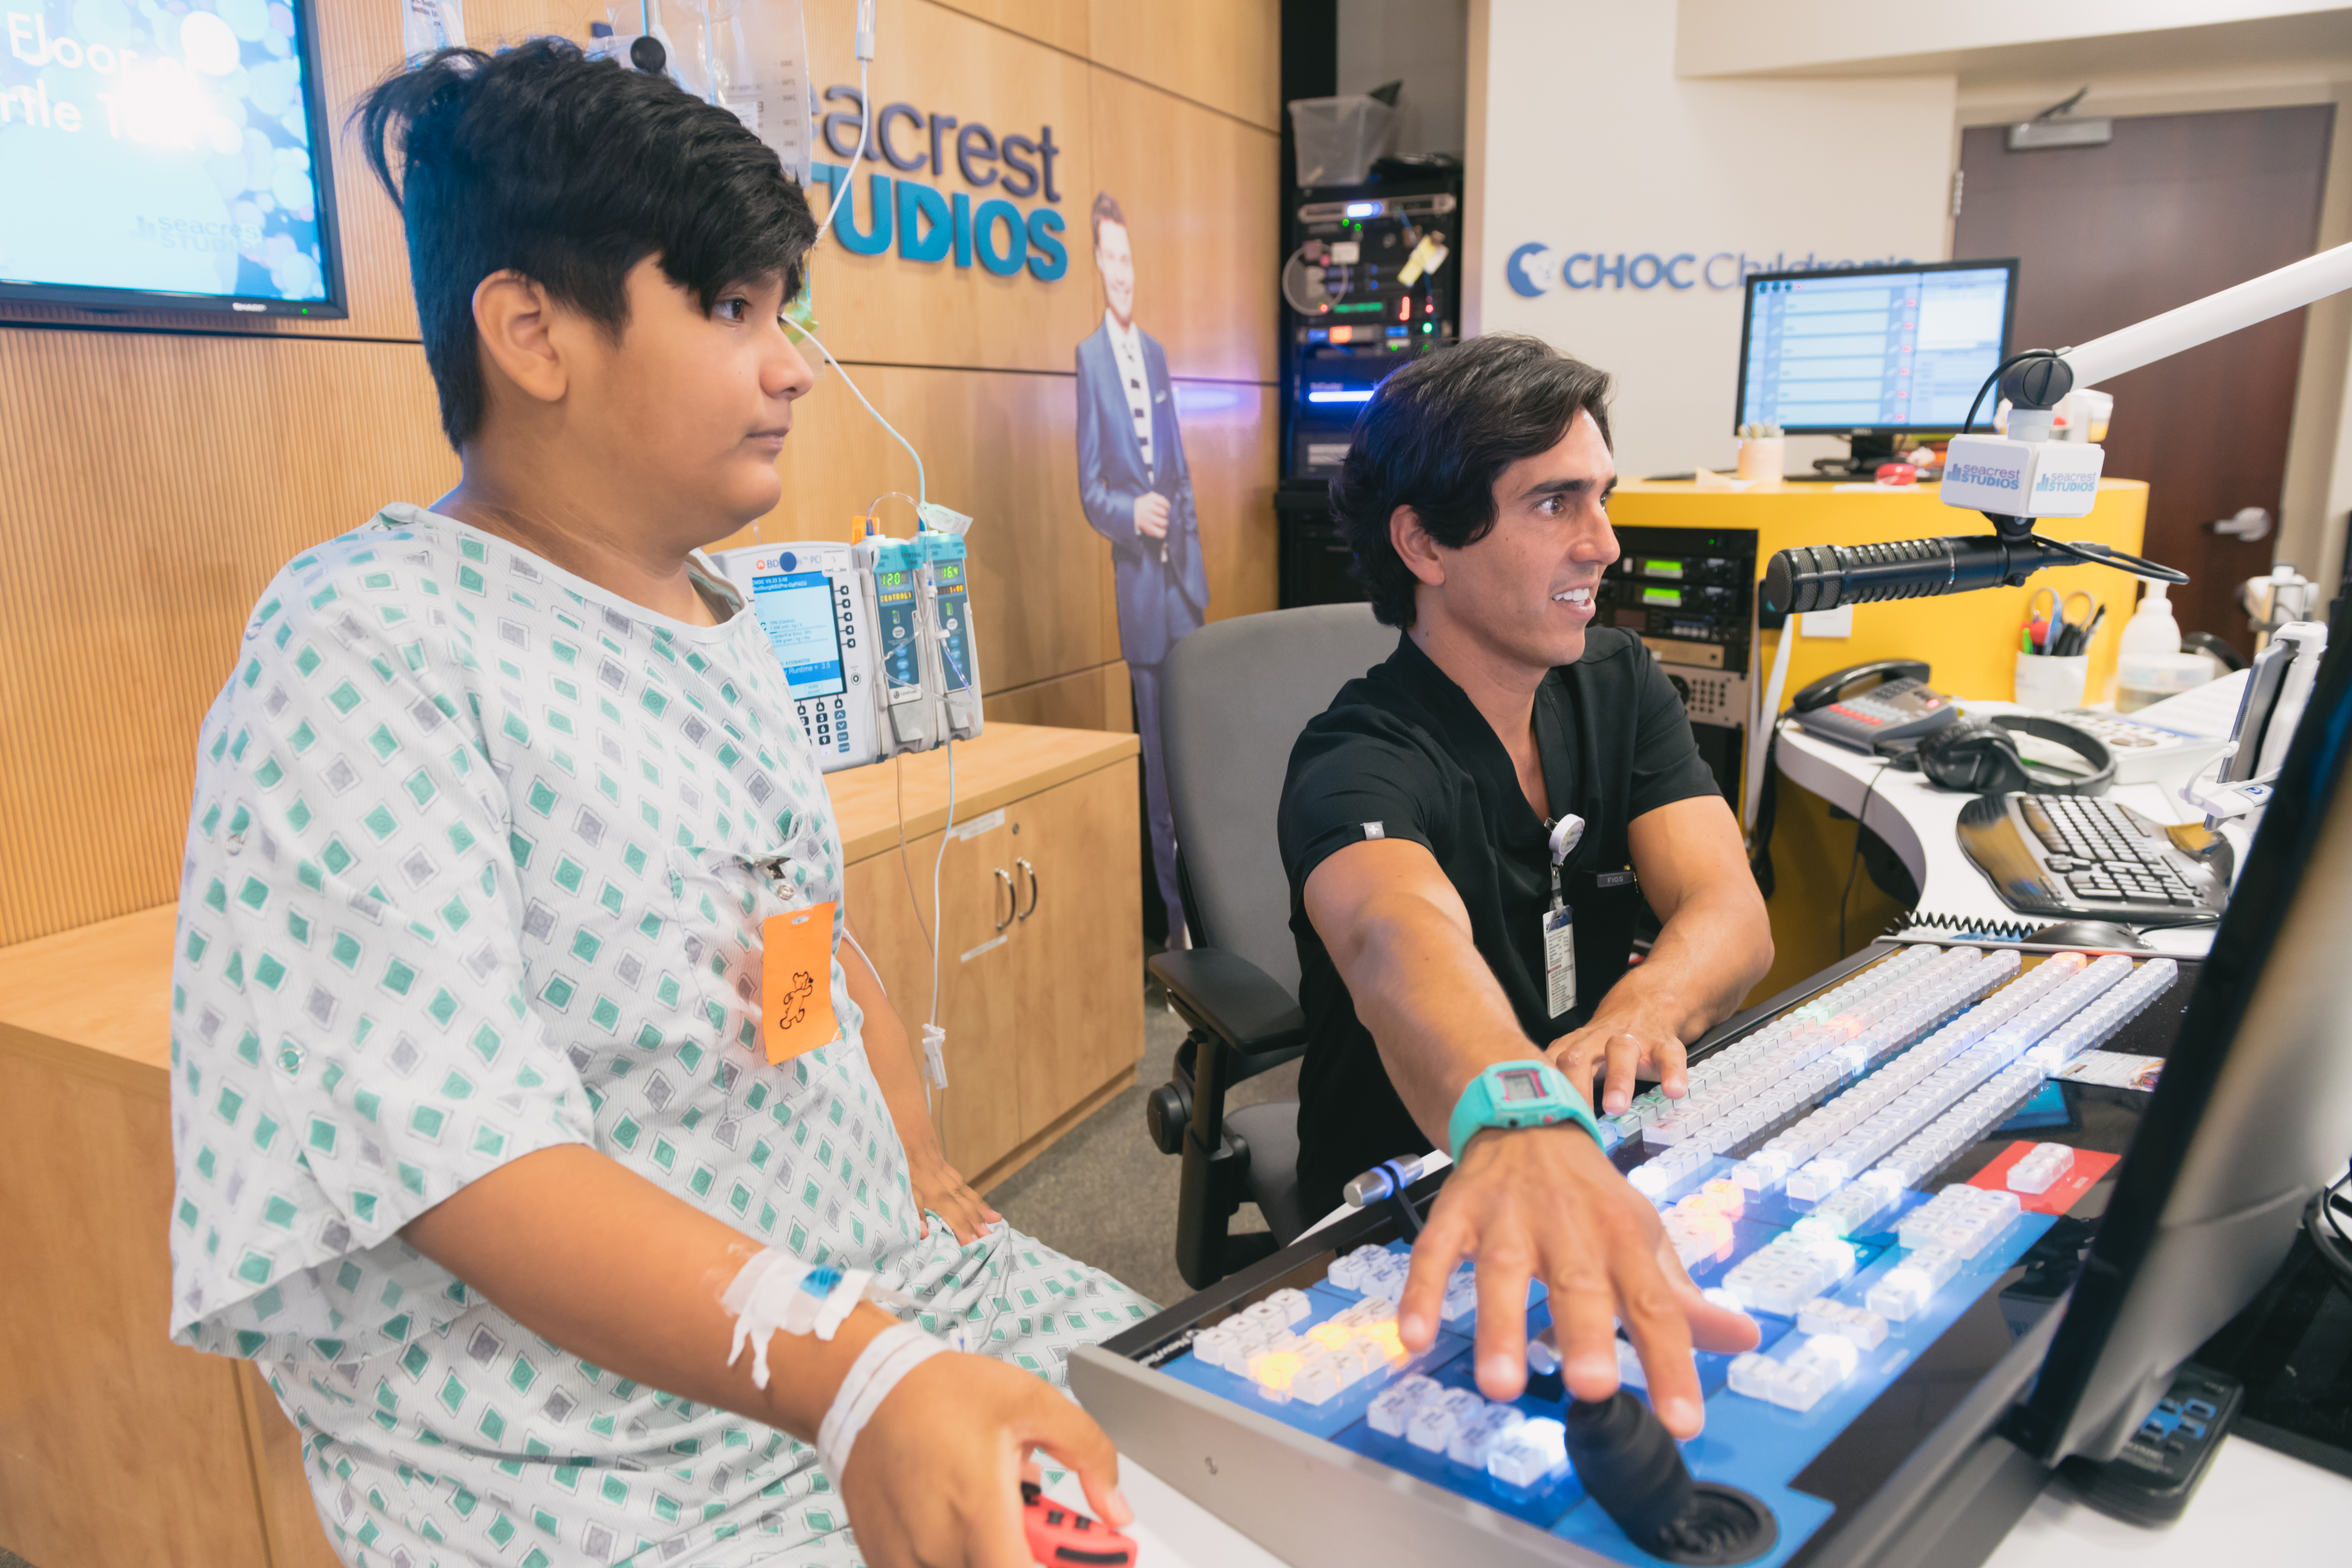 Patient interacting with Seacrest Studios, CHOC's in-house multimedia broadcast center